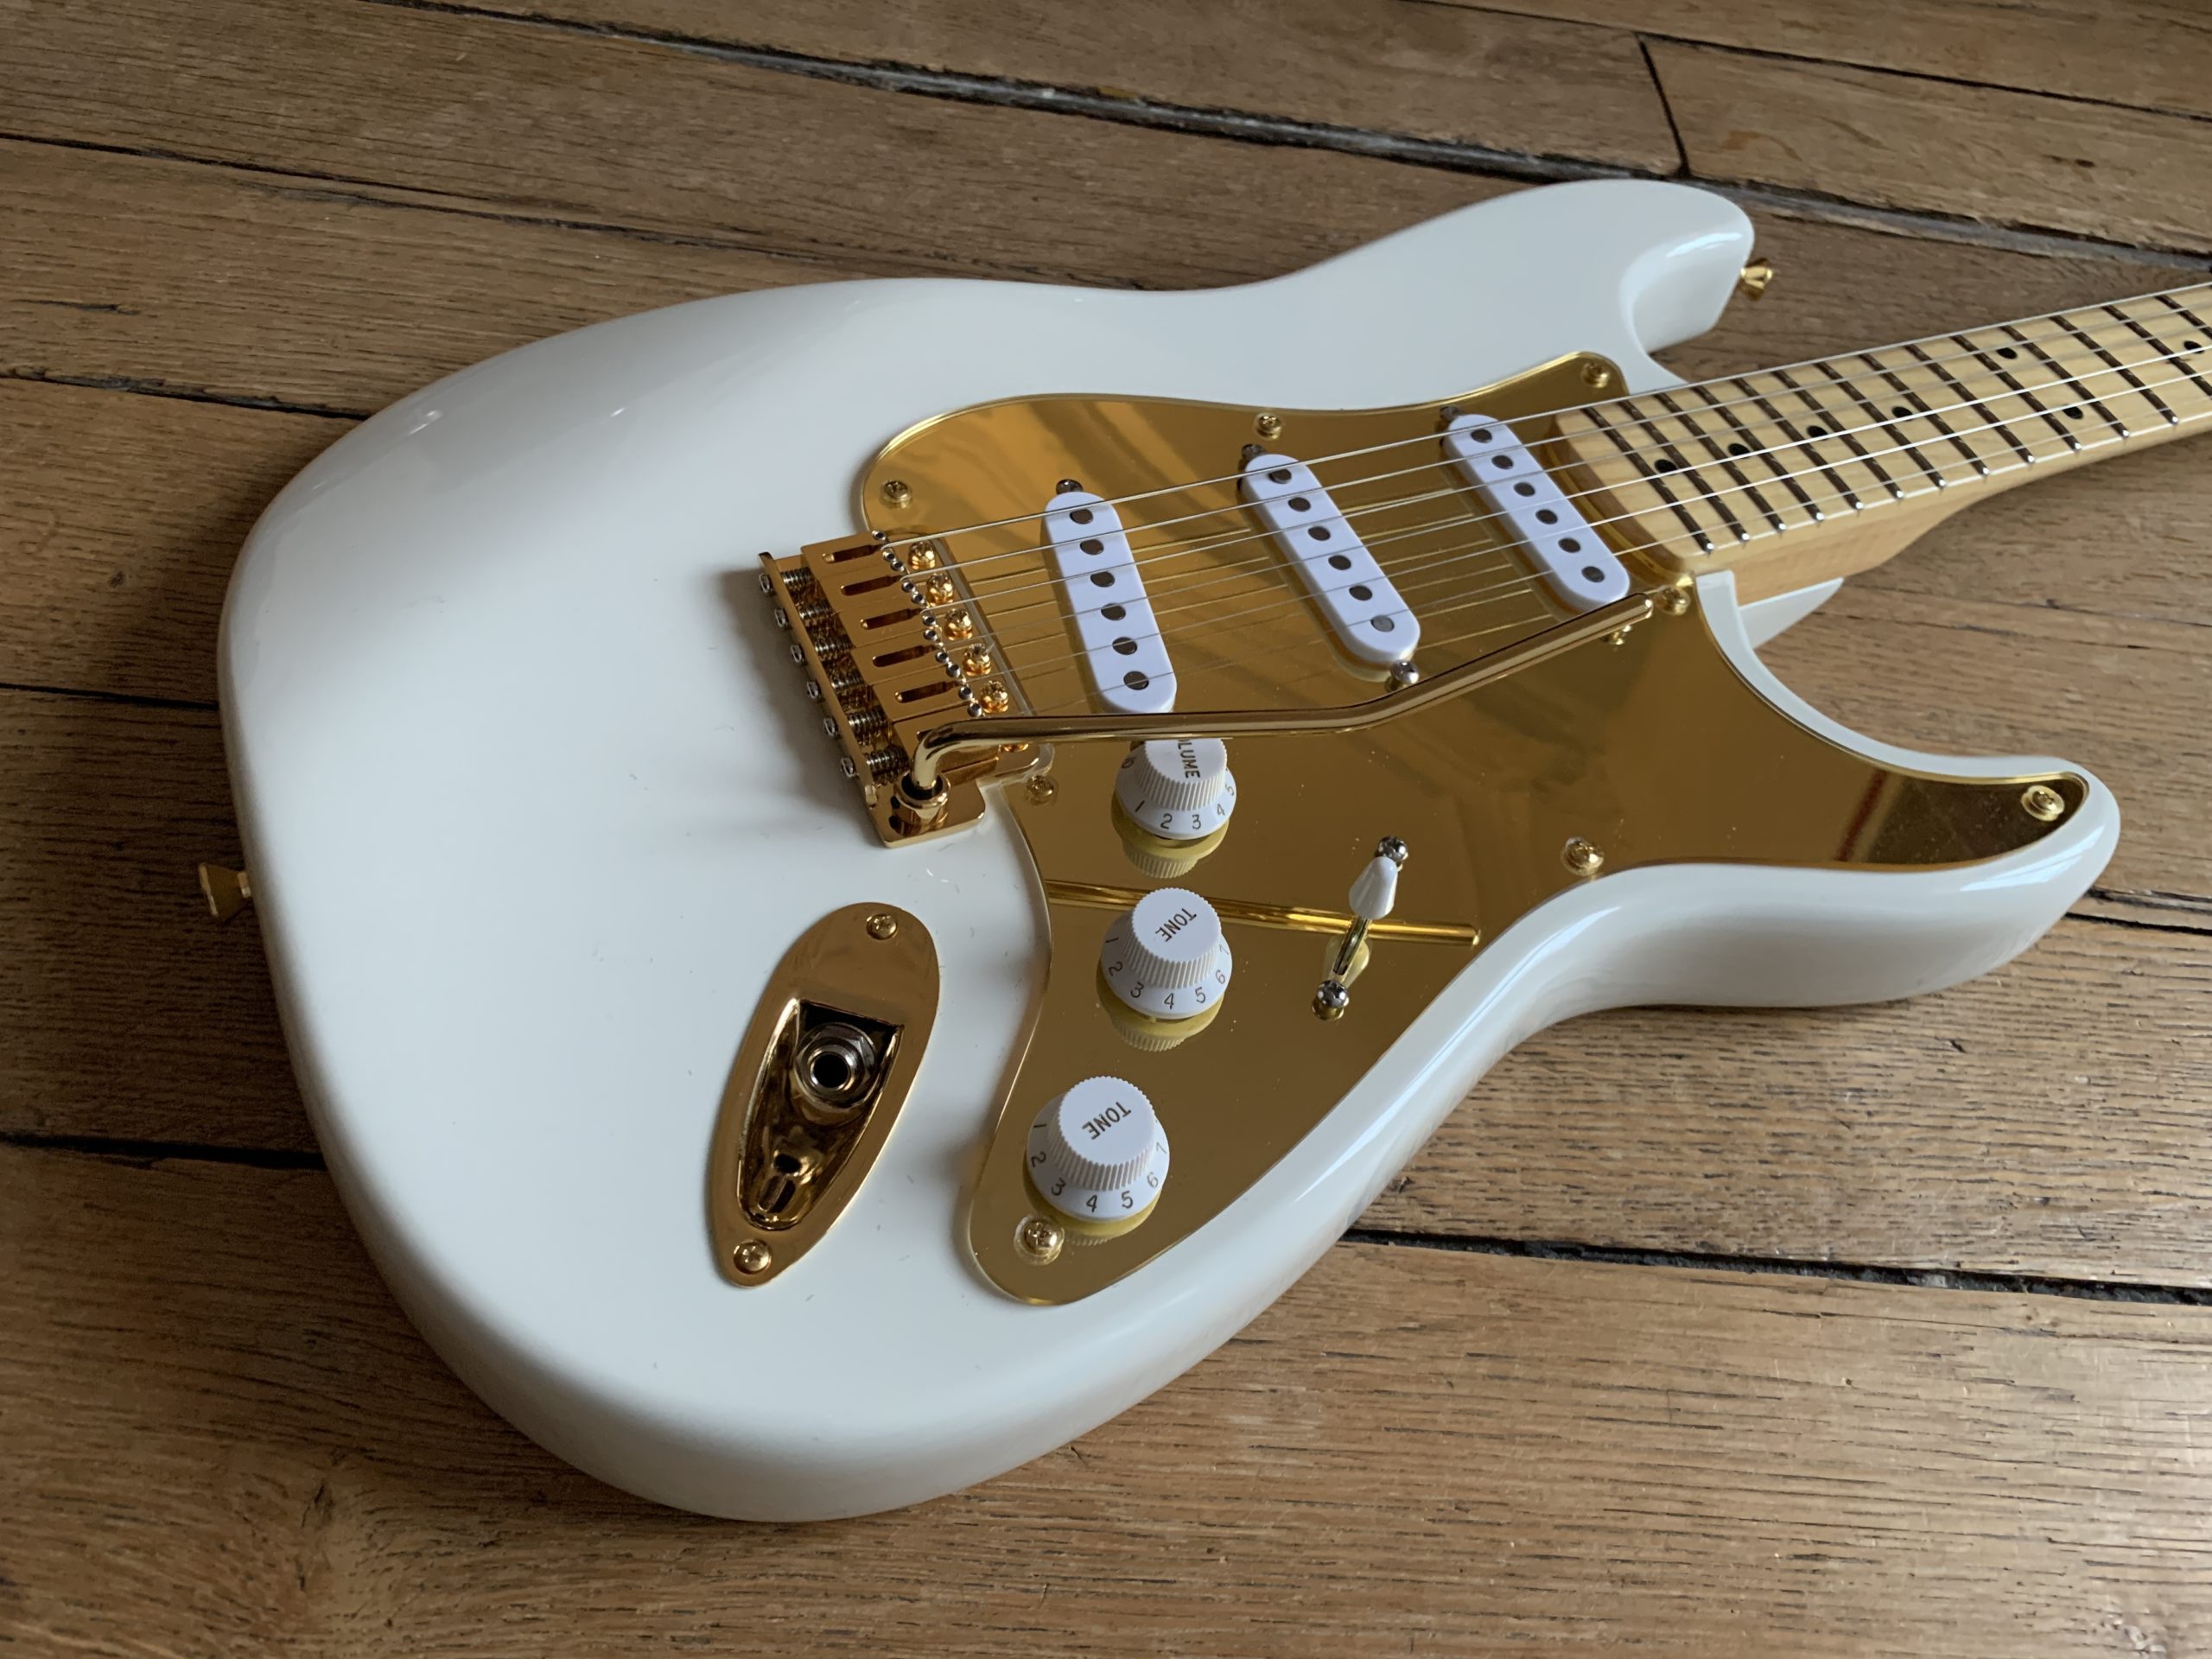 Franfret luthier's guitar model #1, a Strat with a Mahogany body